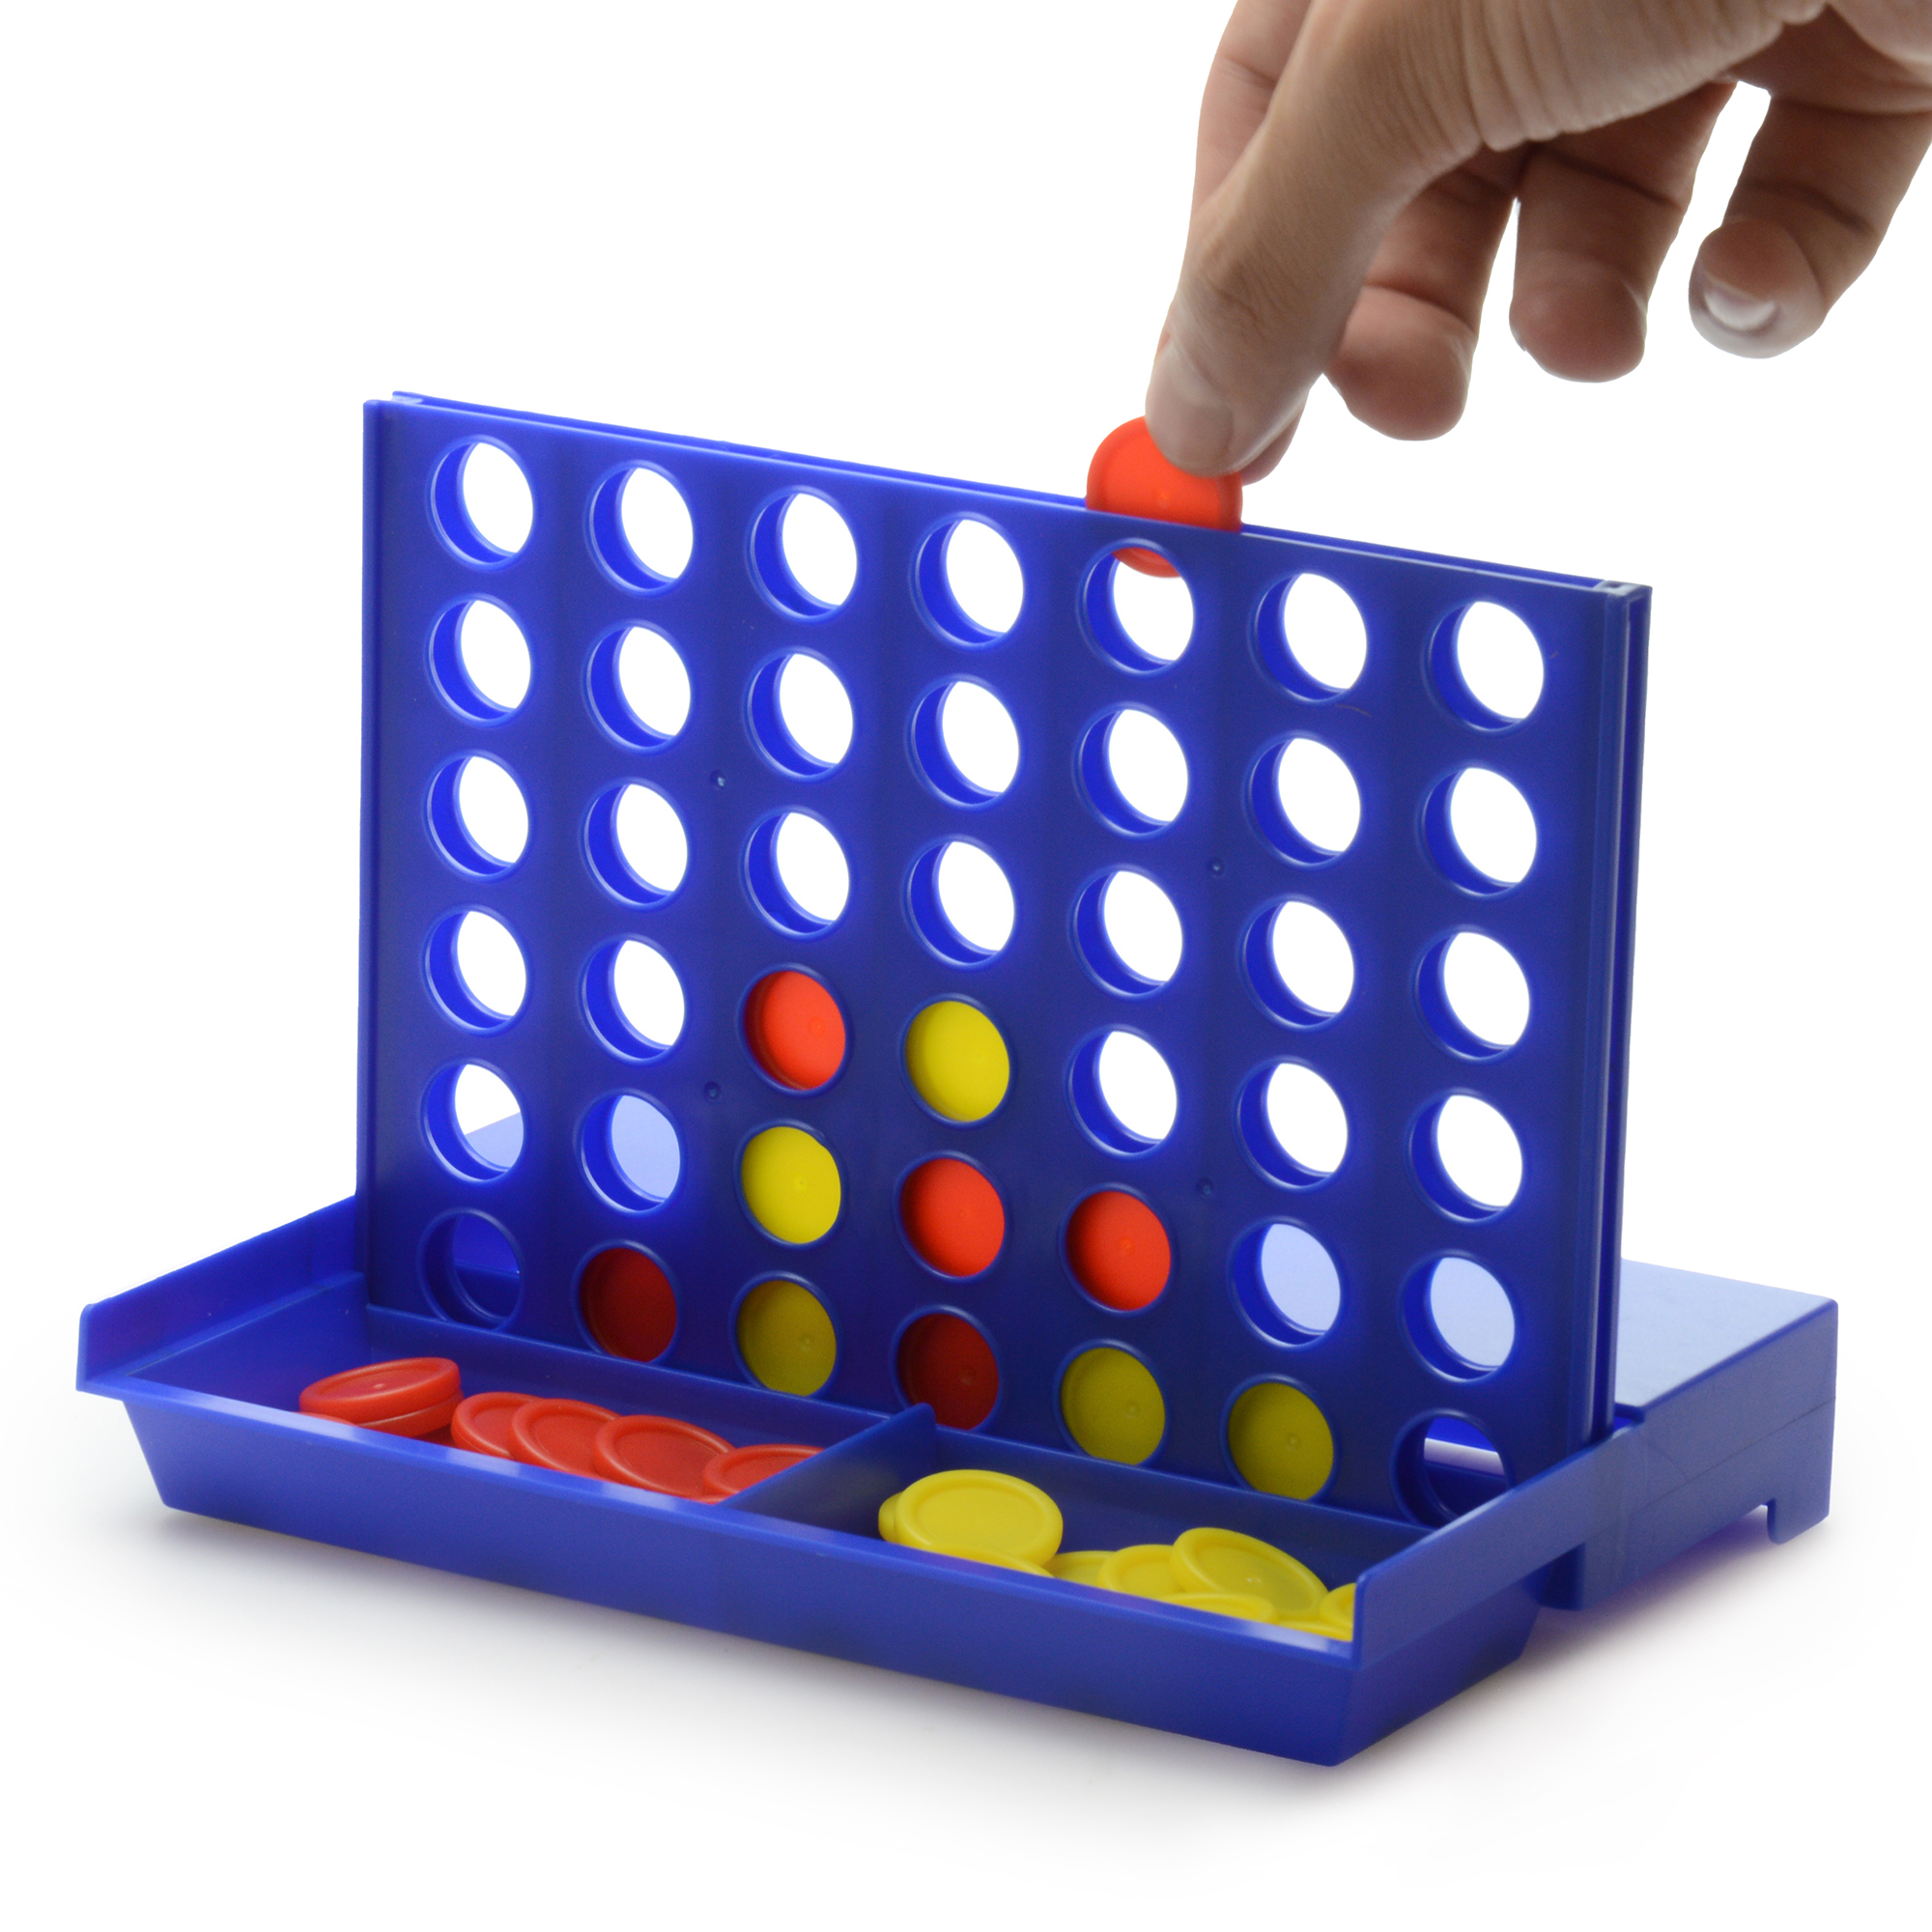 Connect 4 puzzle game